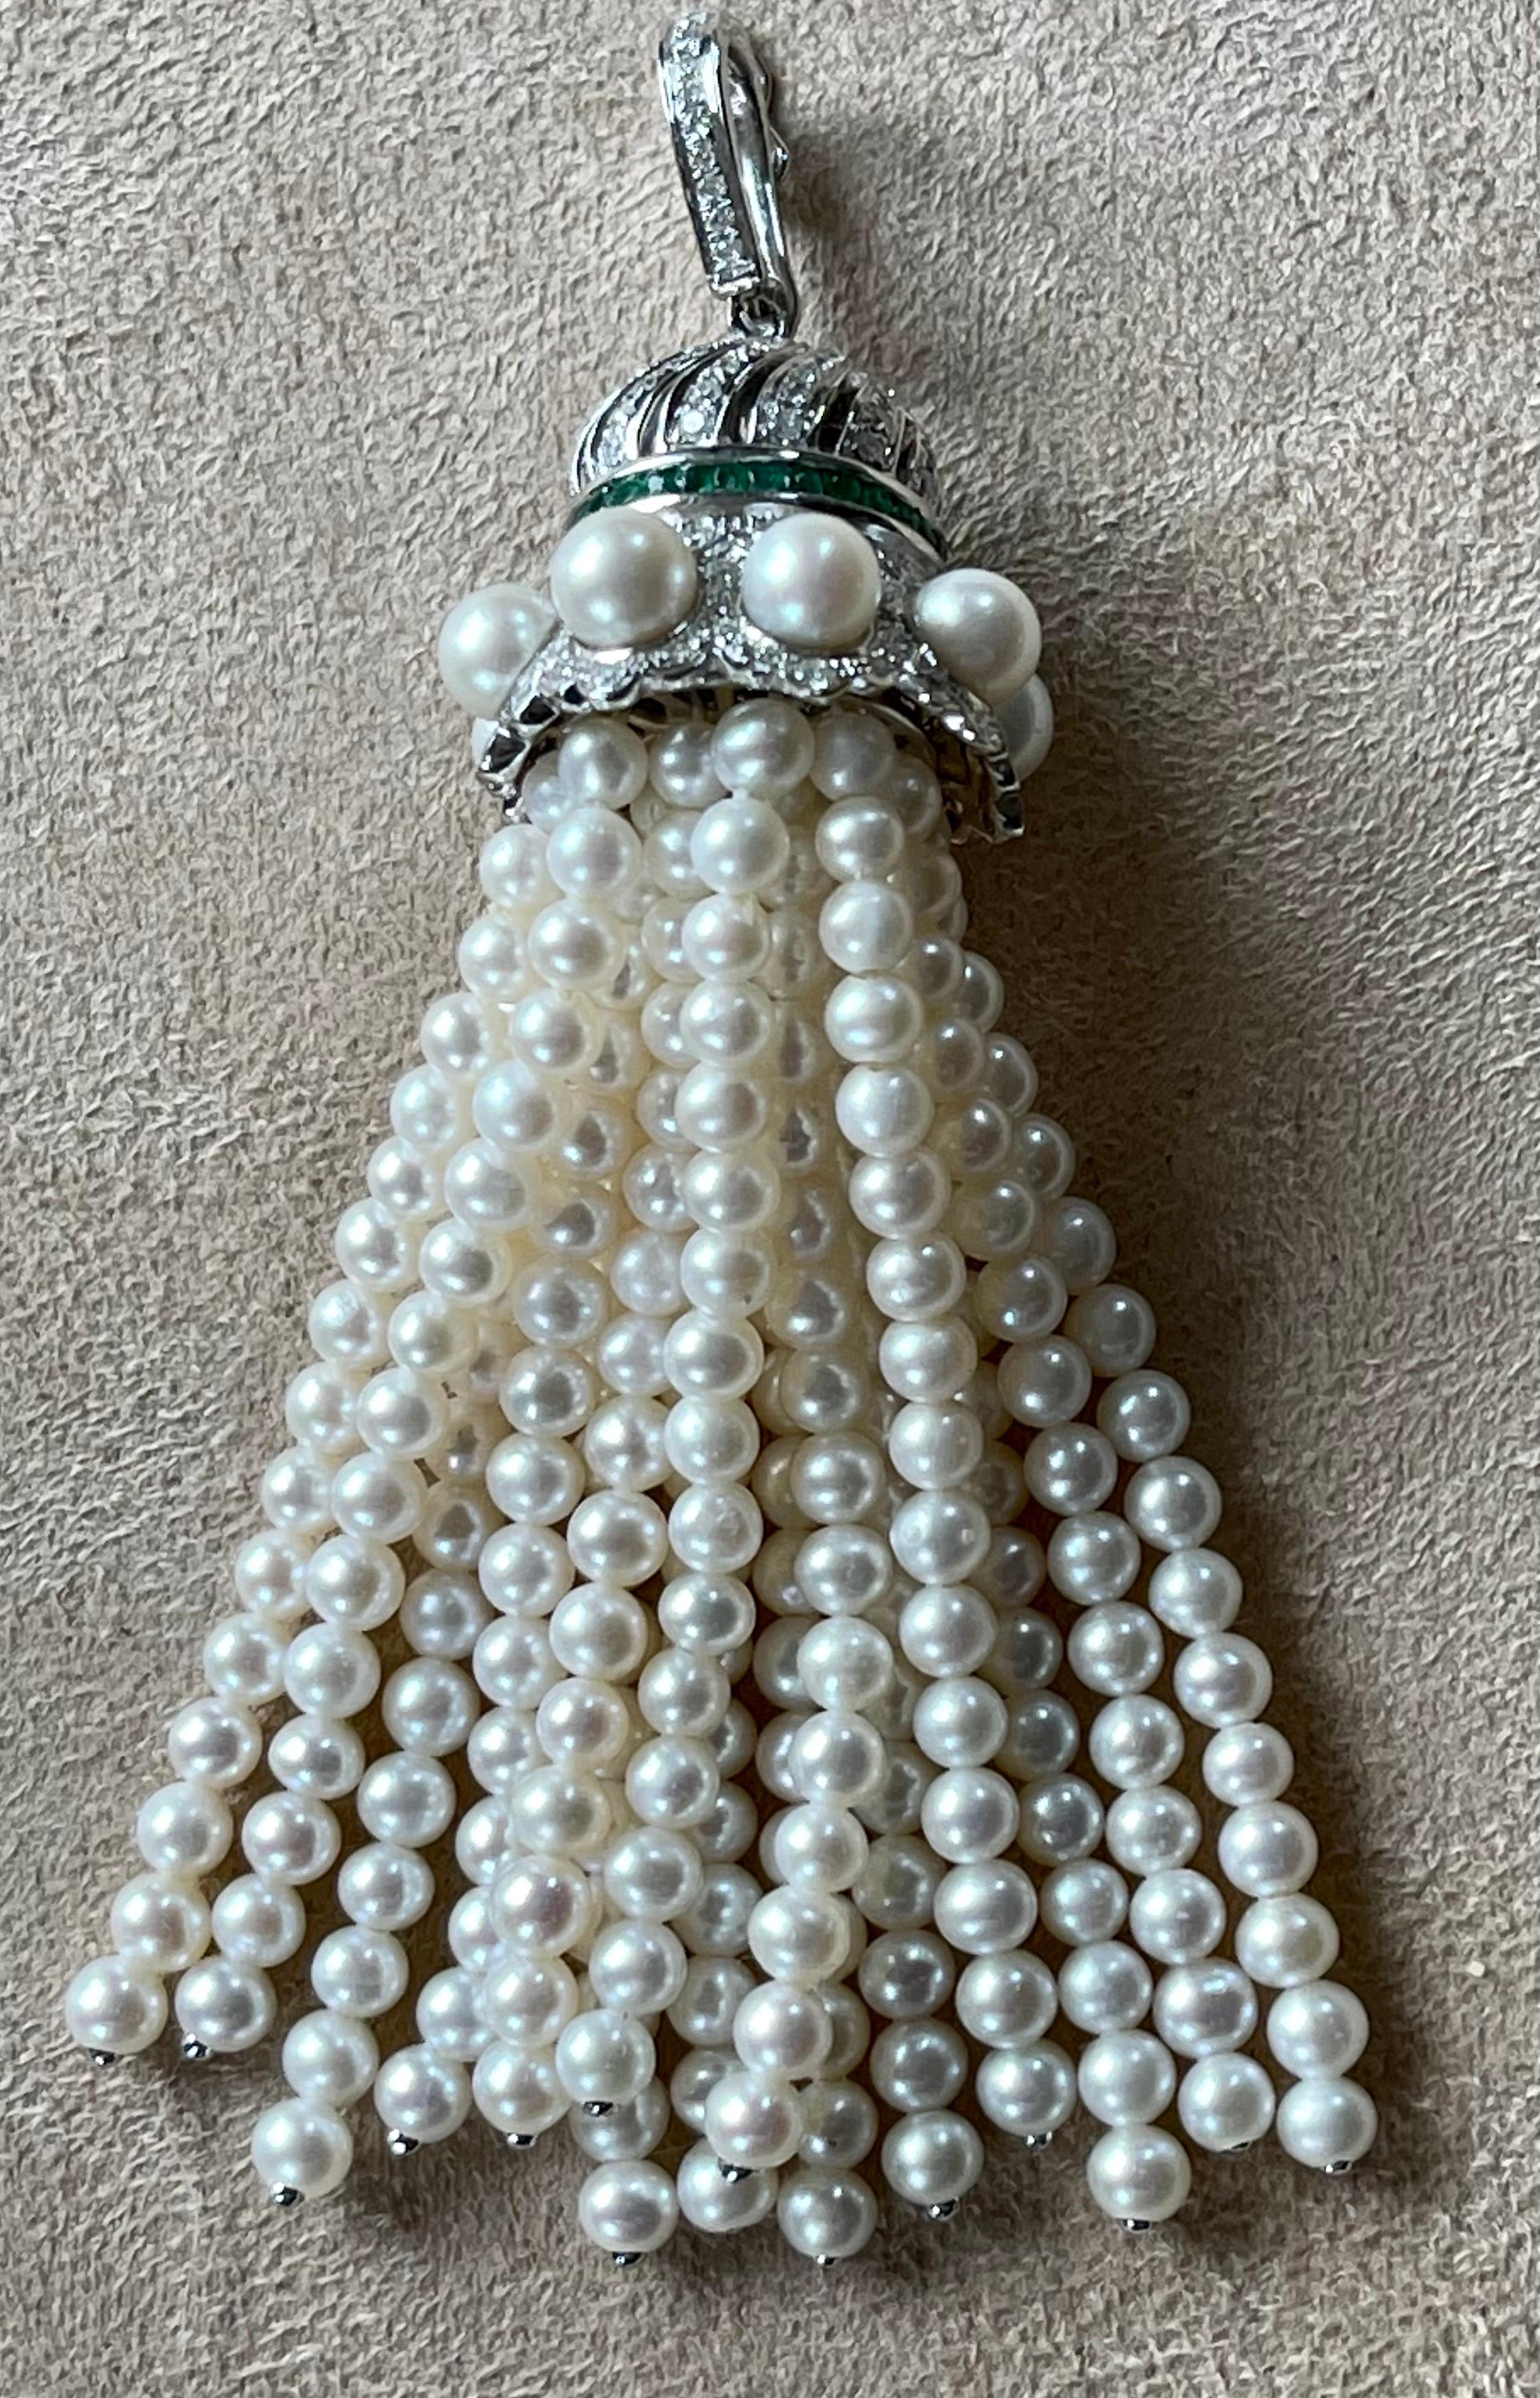 18 K white Gold tassel, featuring strands of graduating round cultured freshwater Pearls and brilliant cut Diamonds with a total weight of 0.80 ct and tiny Emeralds with a total weight of 0.30 ct. 
This elegant tassel pendant can be worn with any